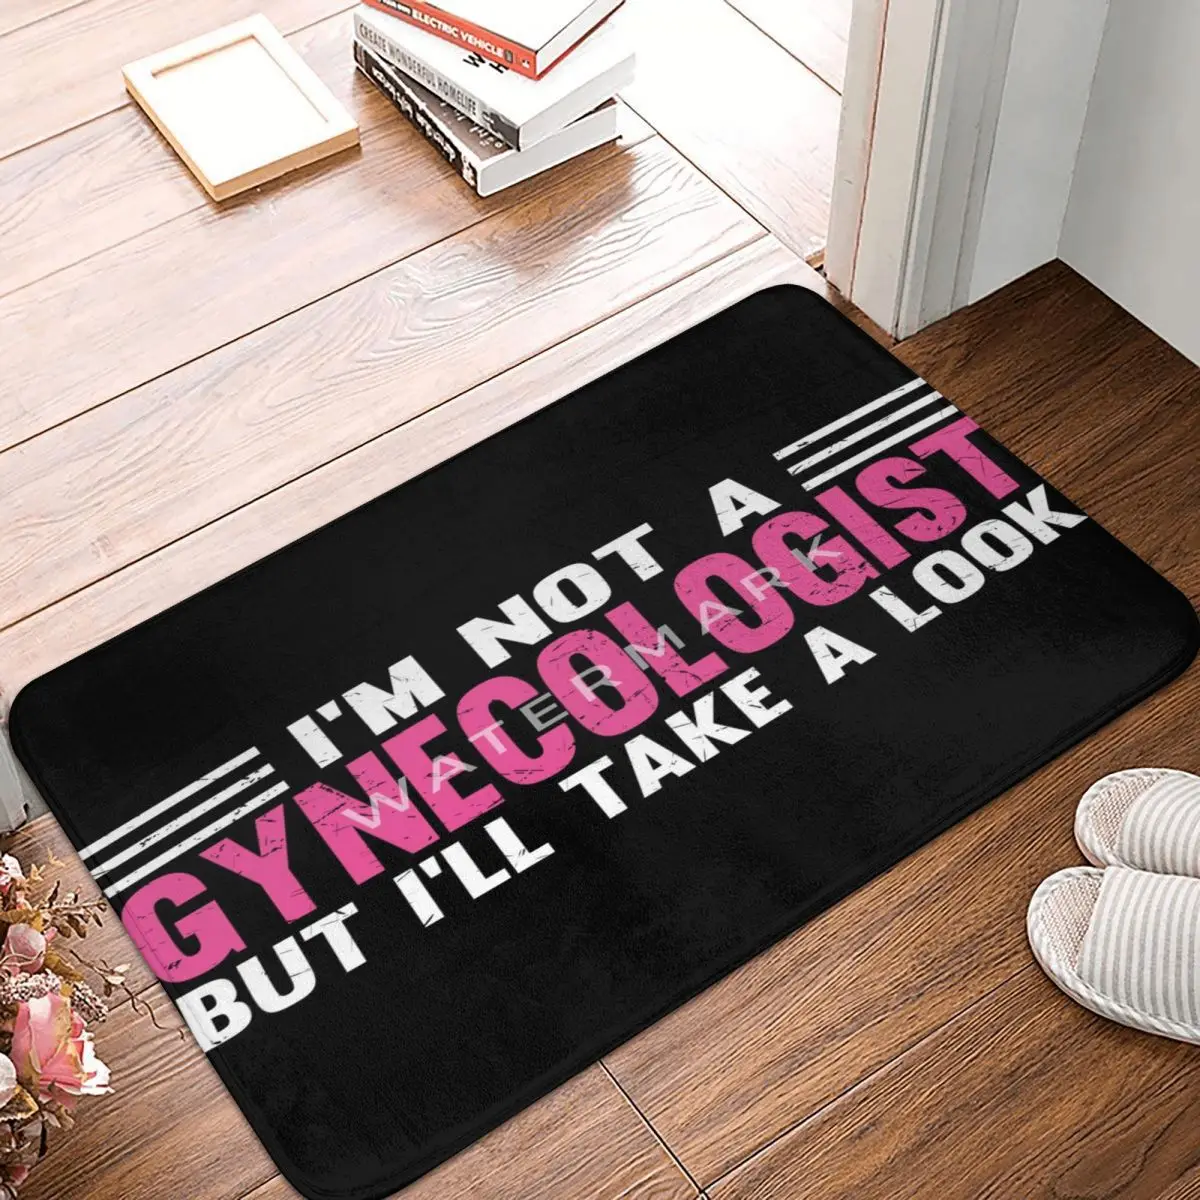 

I'm Not A Gynecologist But I'll Take A Look Carpet, Polyester Floor Mats Mats Personalized Doorway Outdoor Mats Customizable